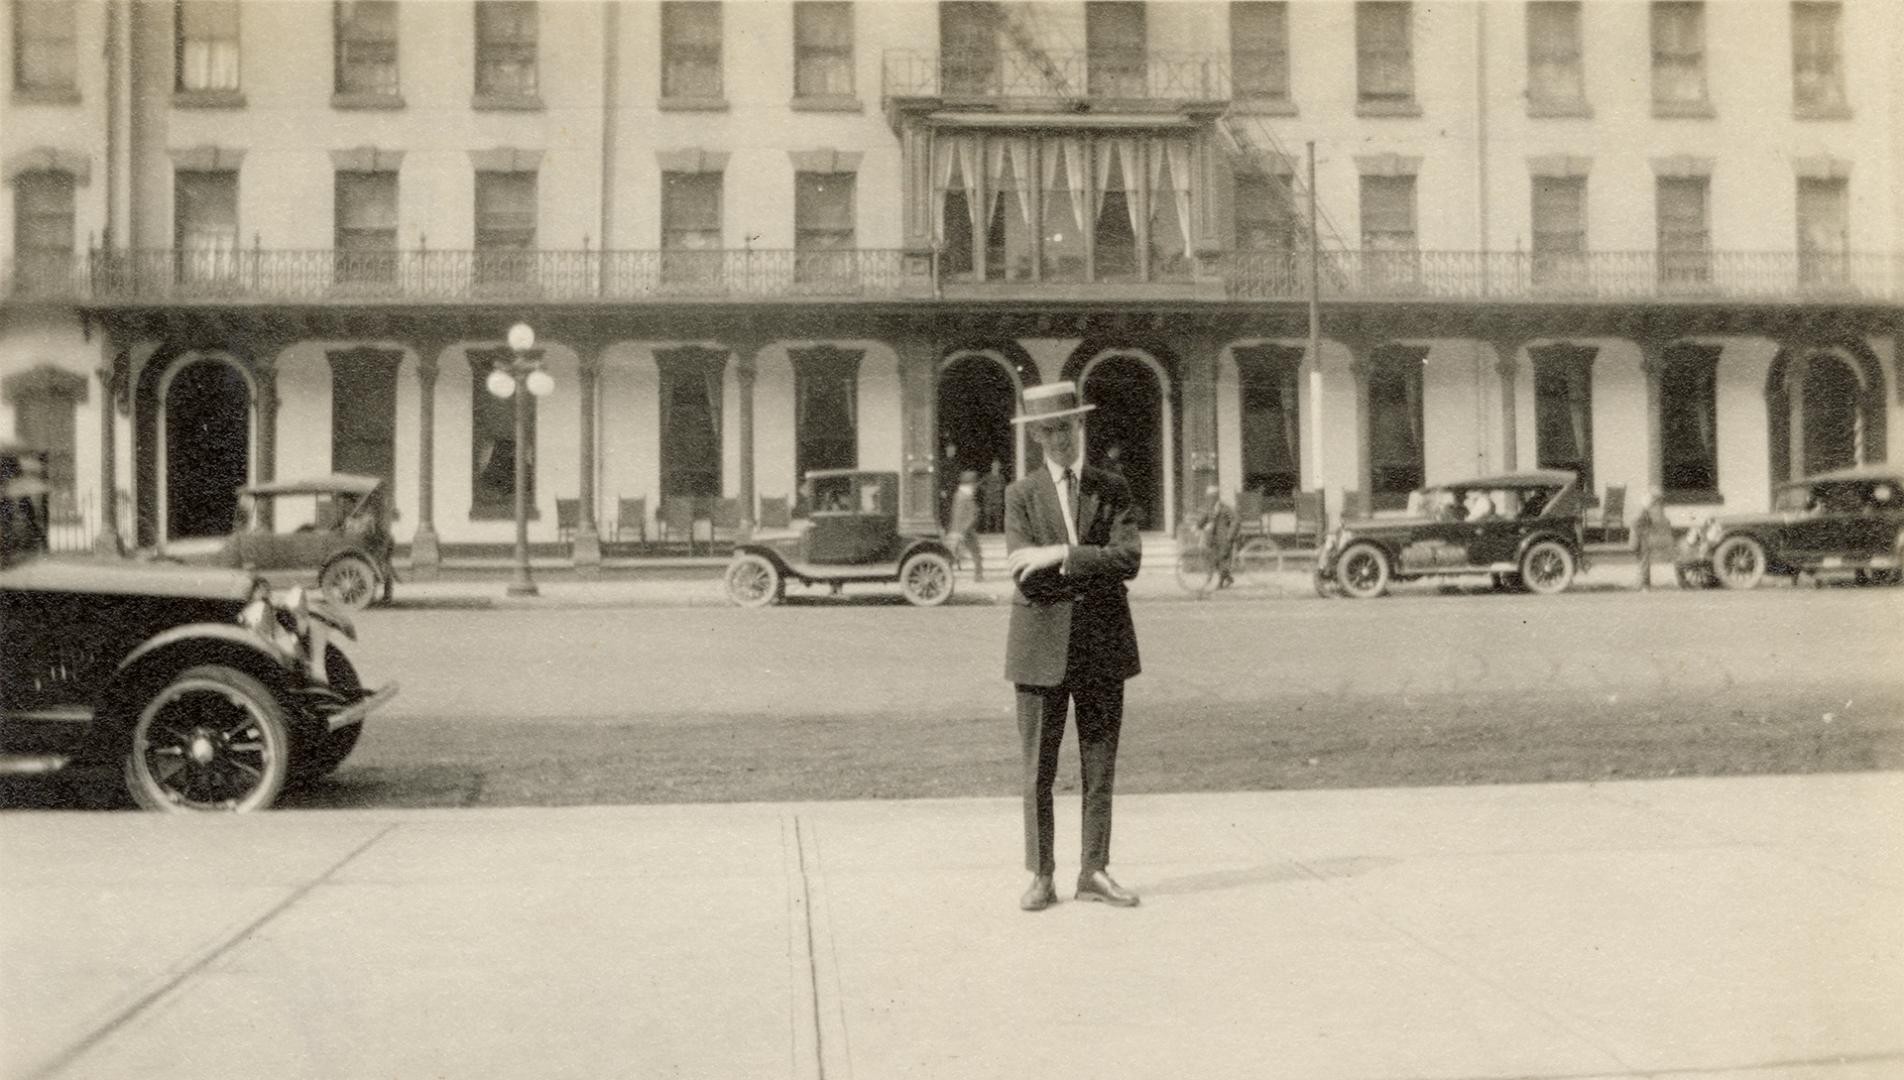 A photograph of a person standing on a sidewalk, with a hotel behind him on the other side of a ...